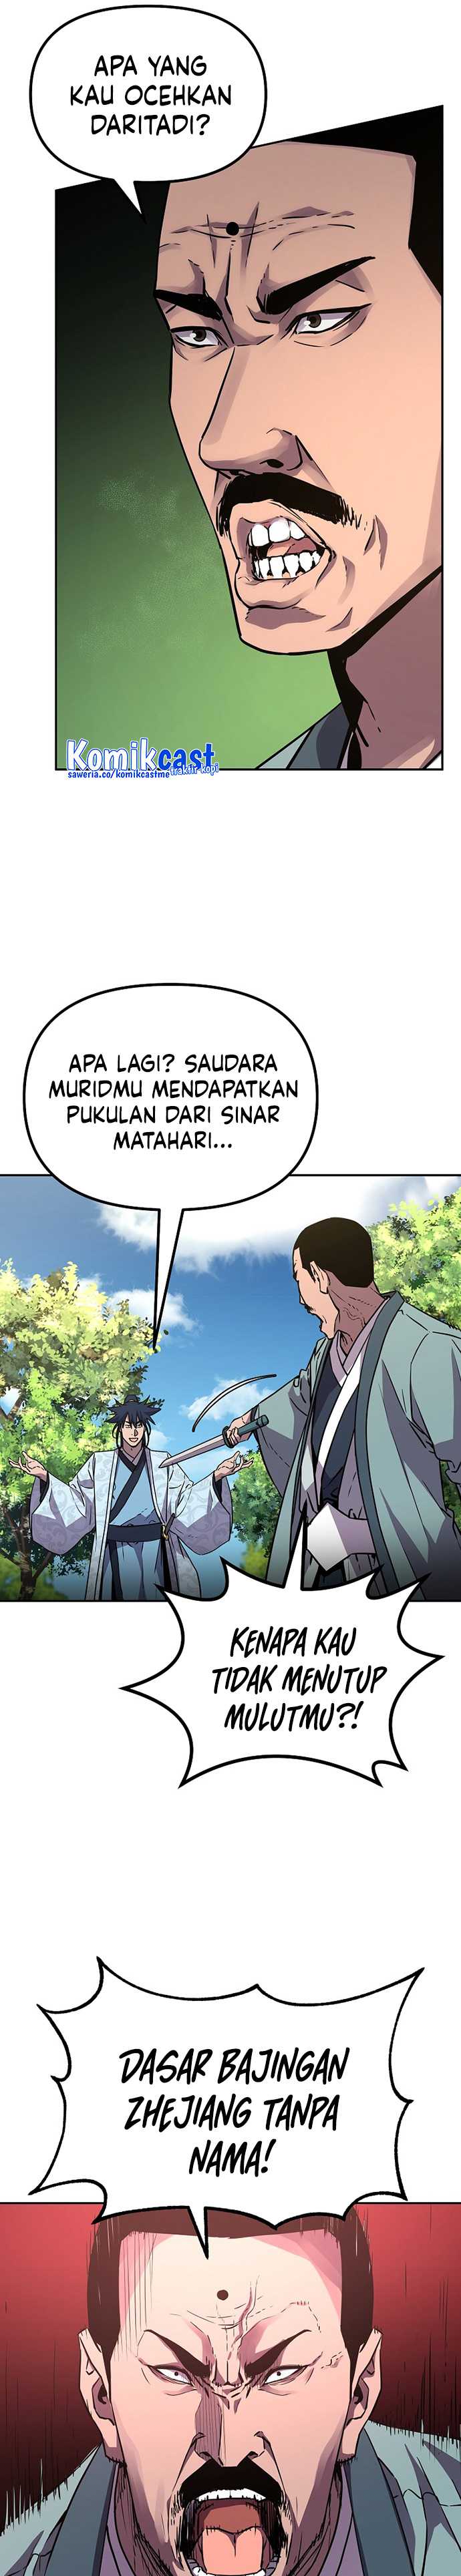 Reincarnation of the Murim Clan’s Former Ranker Chapter 68